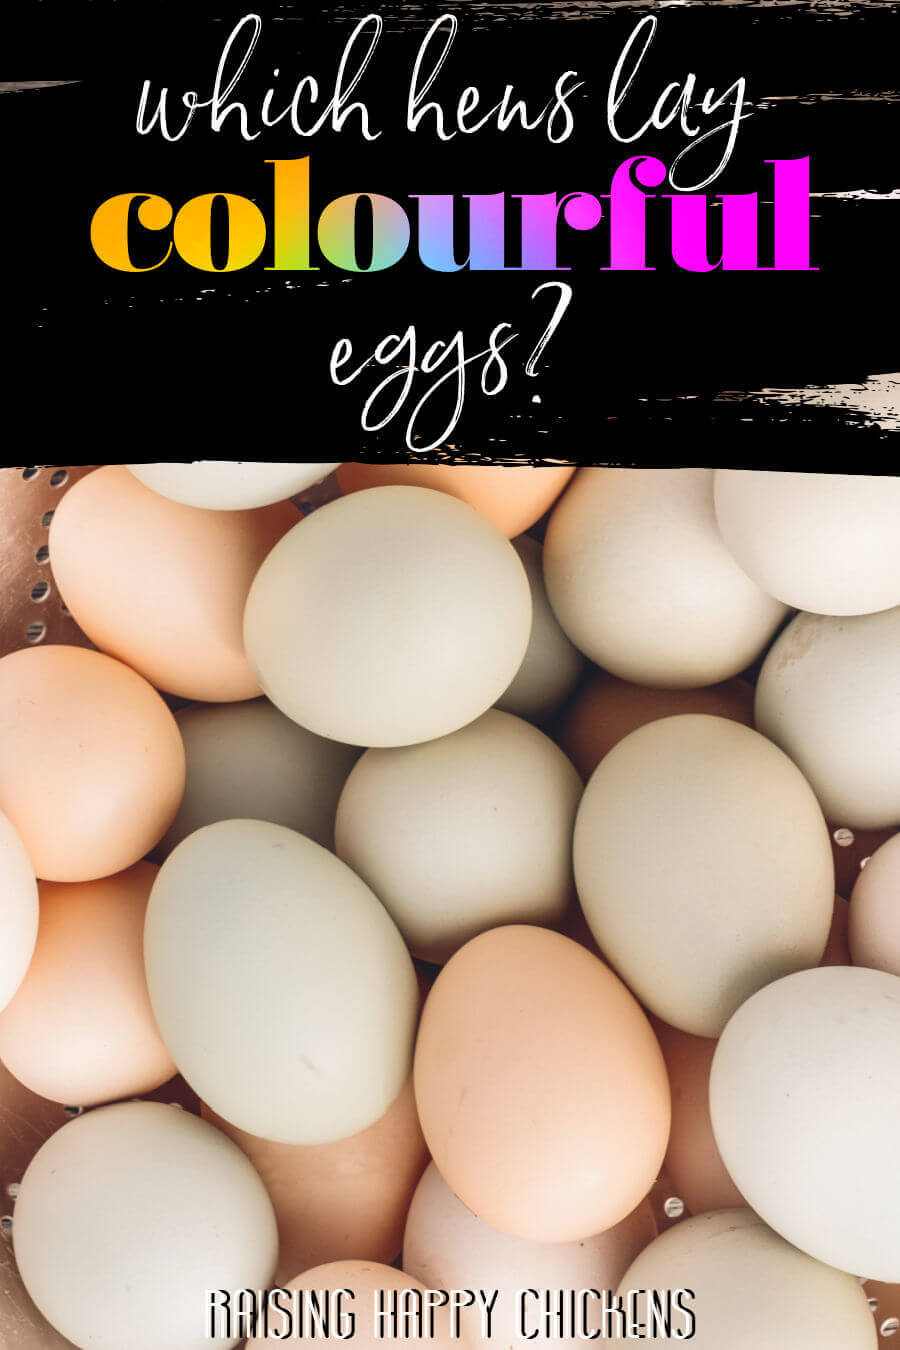 Chickens That Lay Colored Eggs 